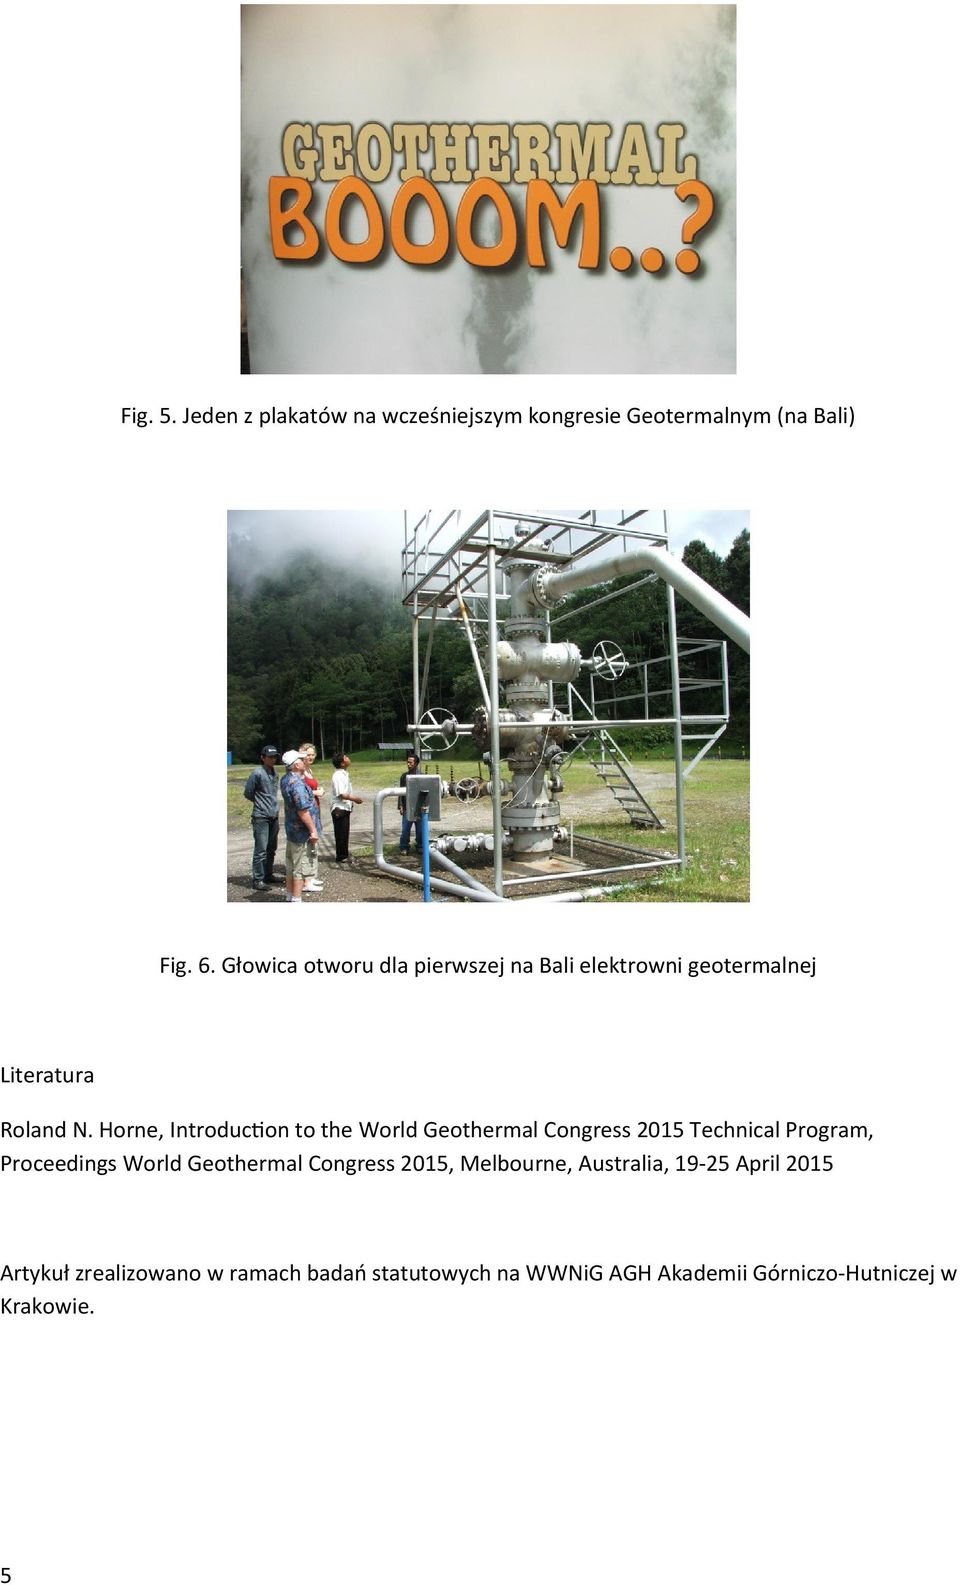 Horne, Introducton to the World Geothermal Congress 2015 Technical Program, Proceedings World Geothermal